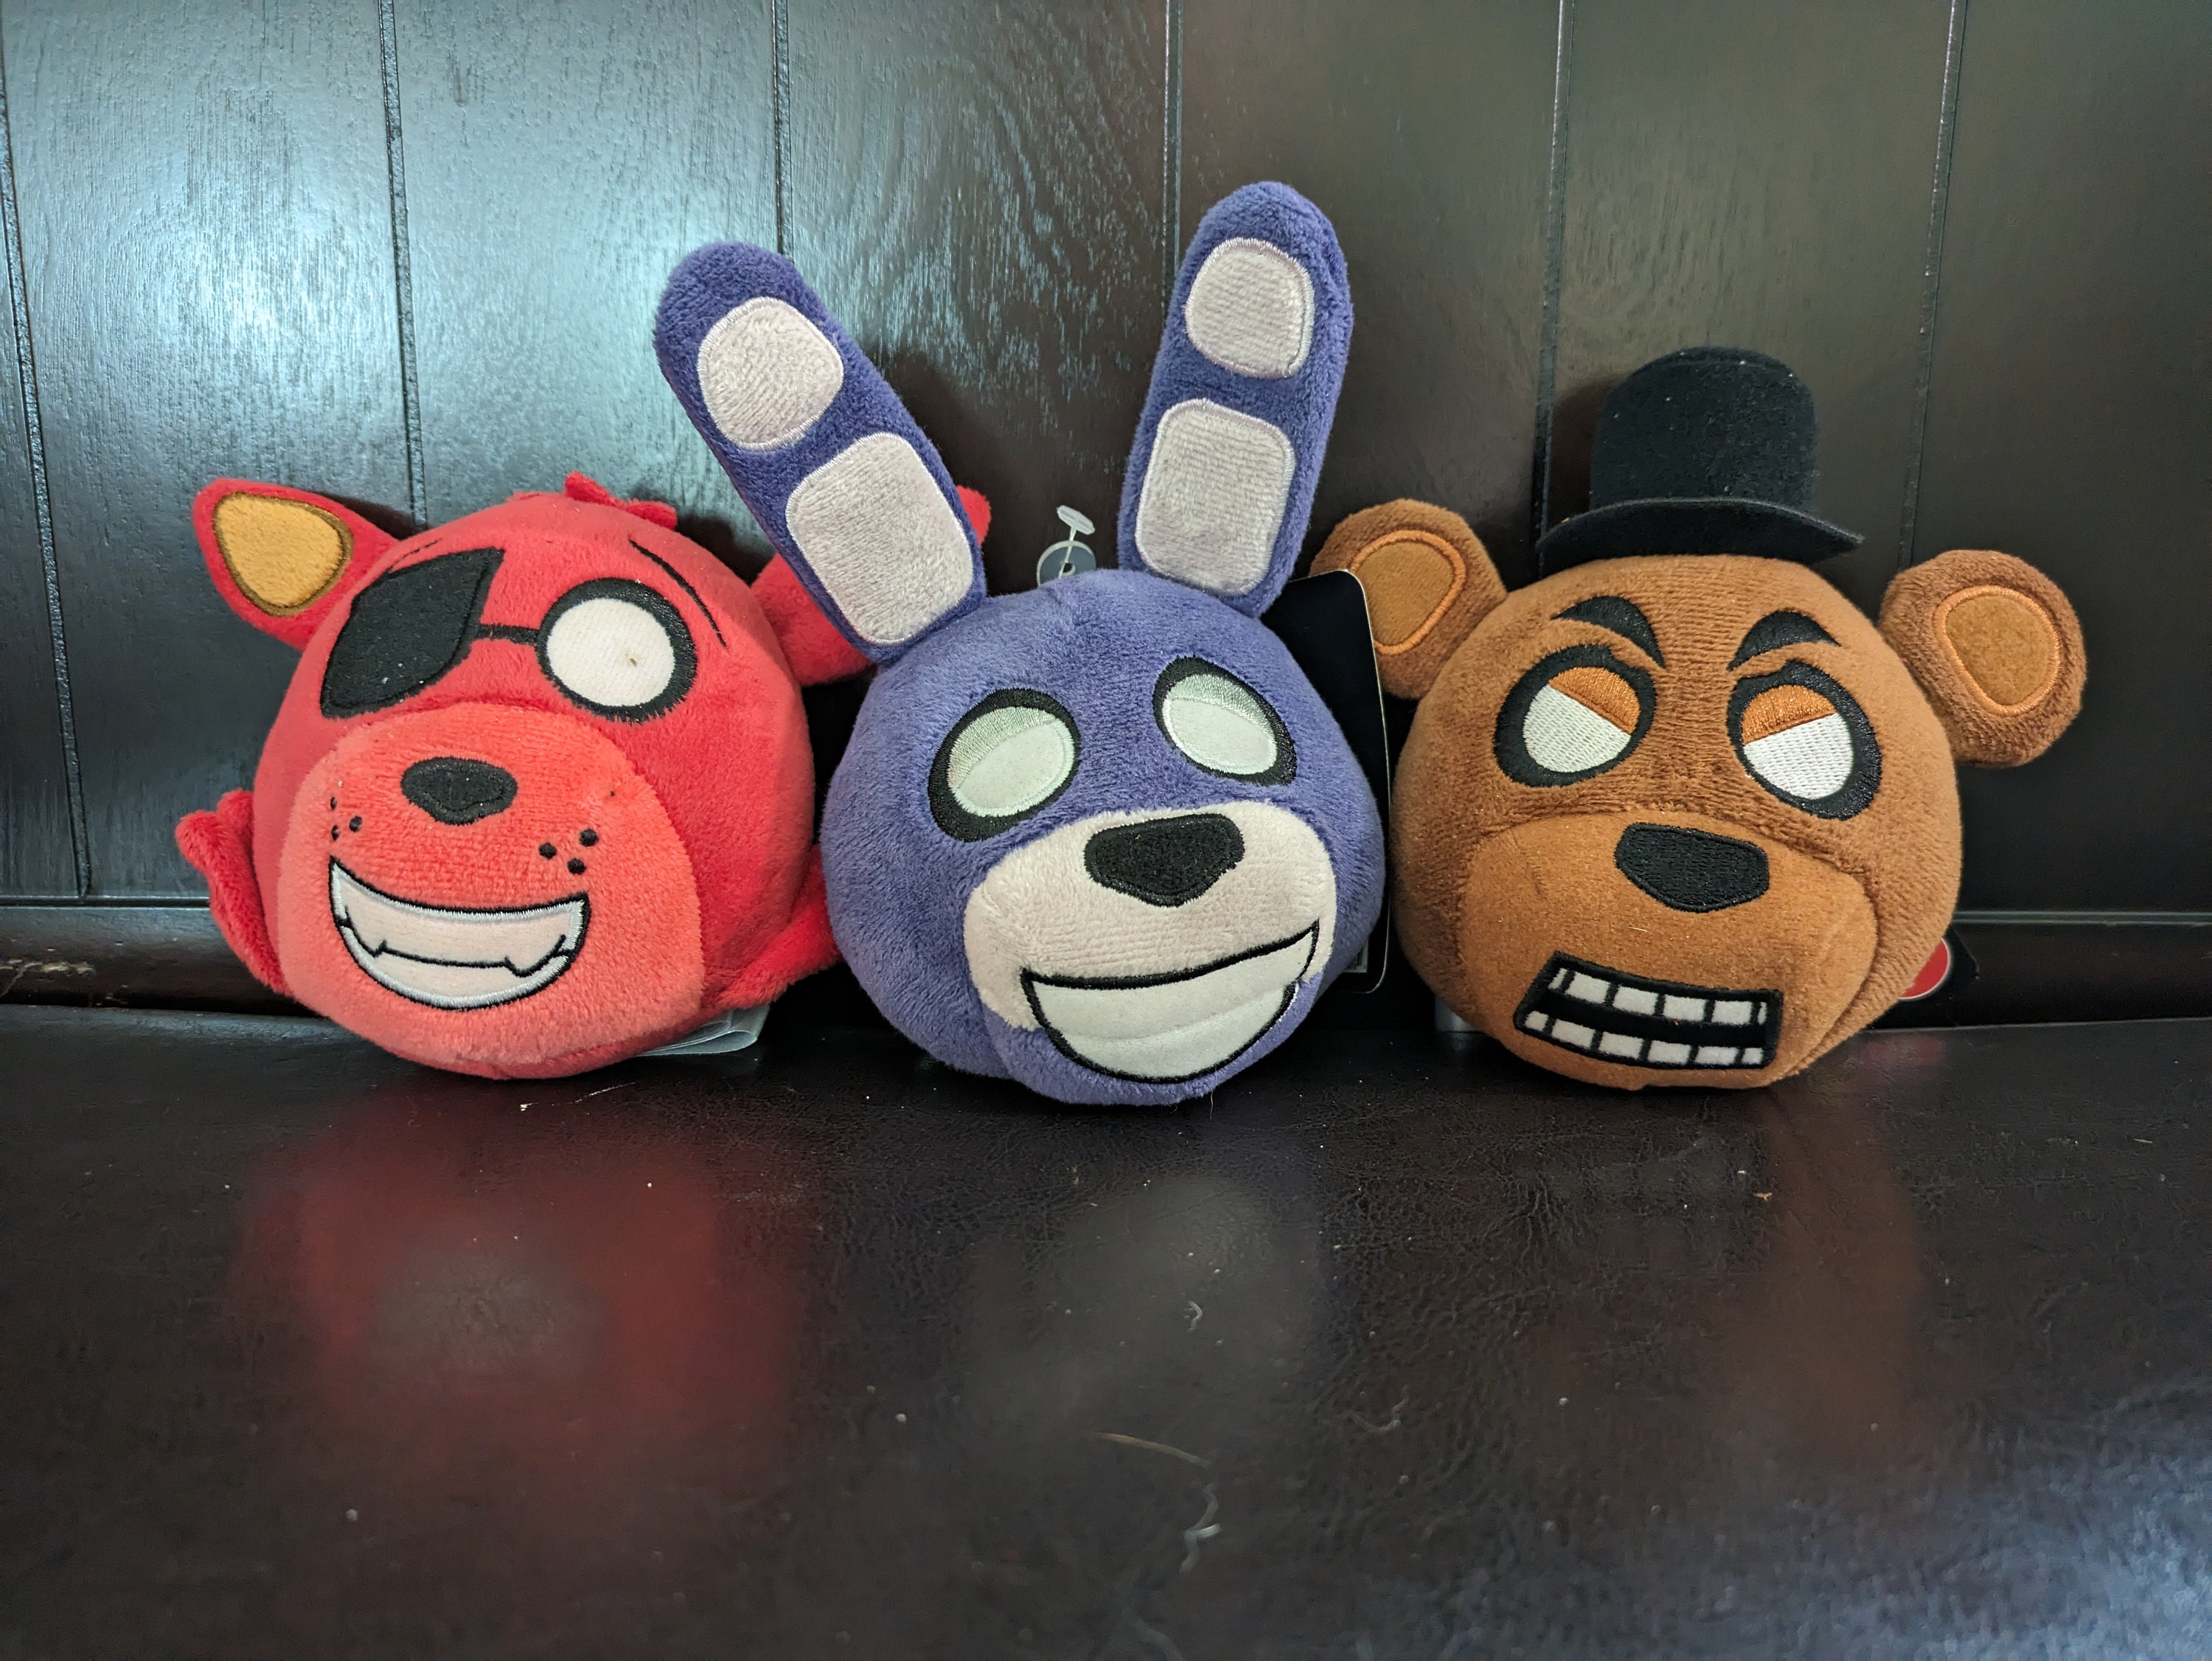 Five Nights at Freddy's Plushie Sister Location Plush Toy Stuffed Doll US  Stock – ASA College: Florida